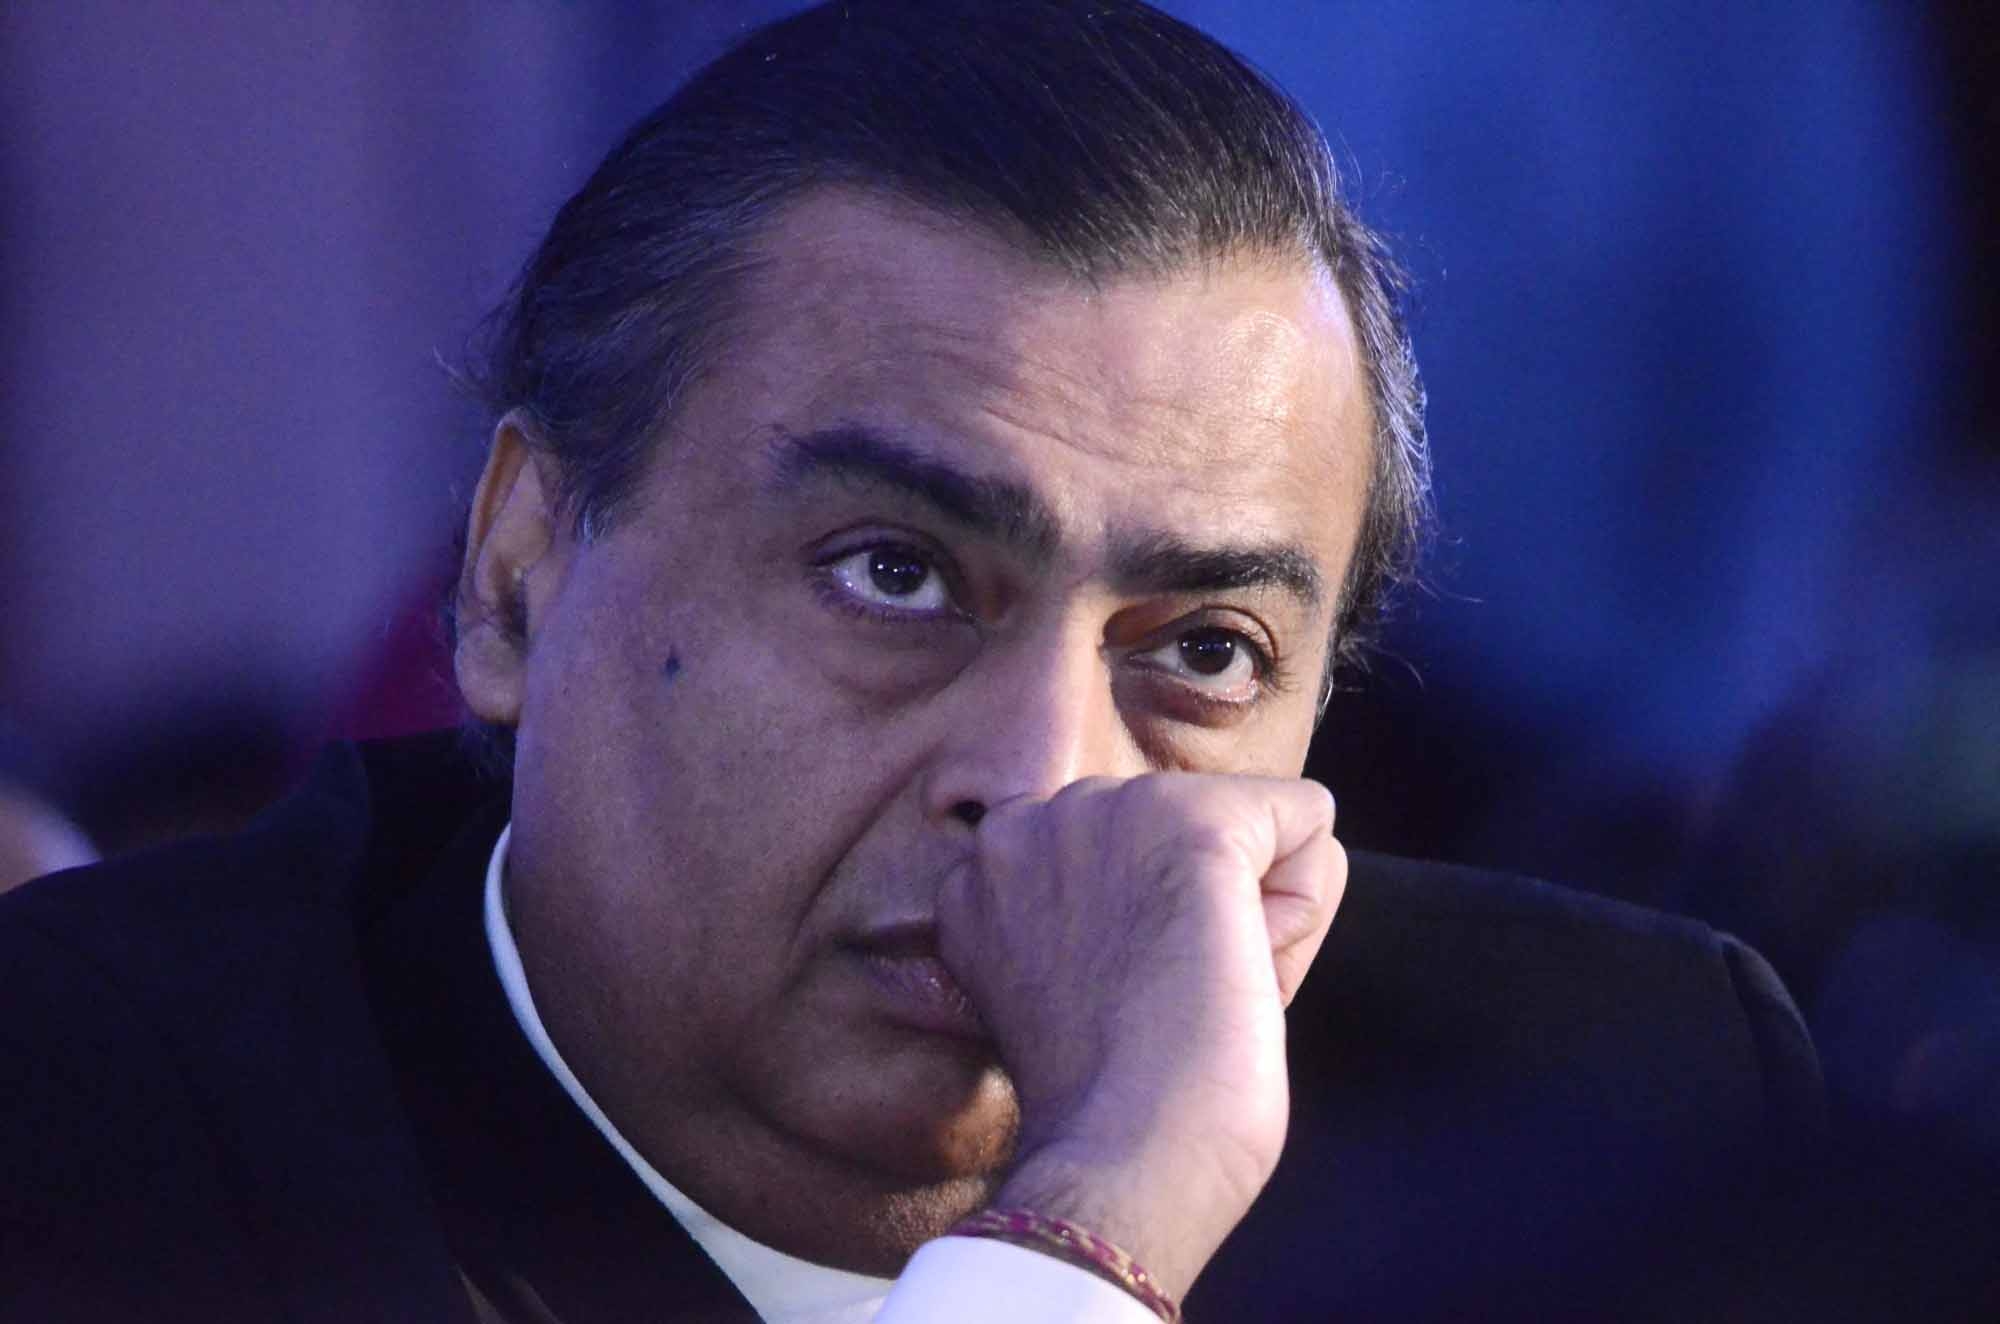 2.50 crores rupees leak out every second from Mukesh Ambani's assets